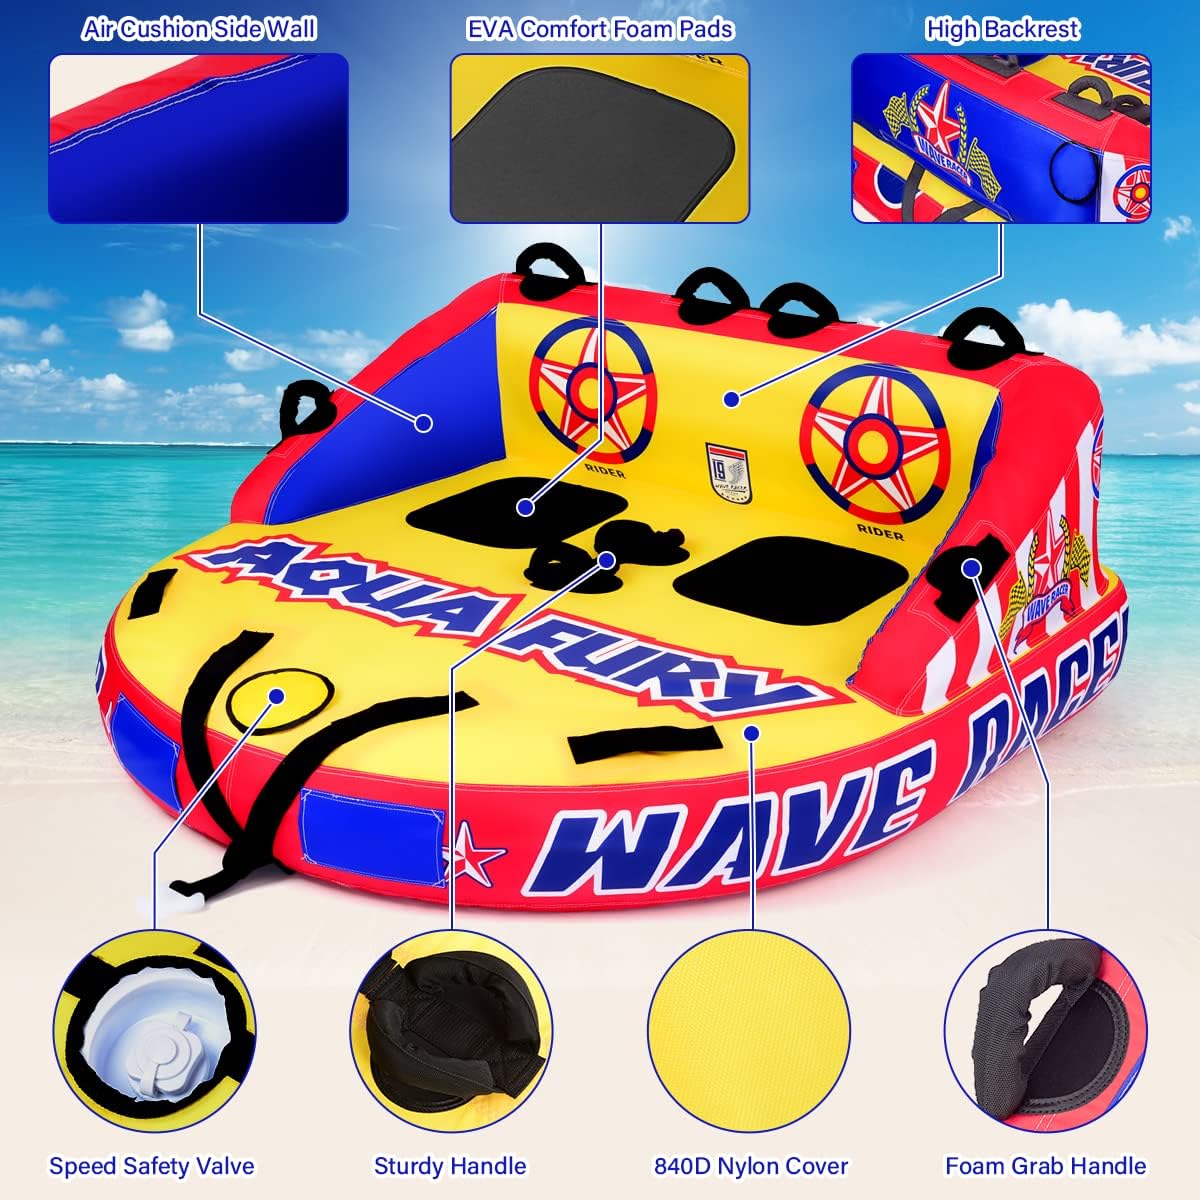 MewVeer Towable Tube for Boating, Safety Inflatable Boat Tubes and Towables, 1~2 Person Foam Seats, Water Sport Towables with Drainage, Quick Connector, Large Capacity